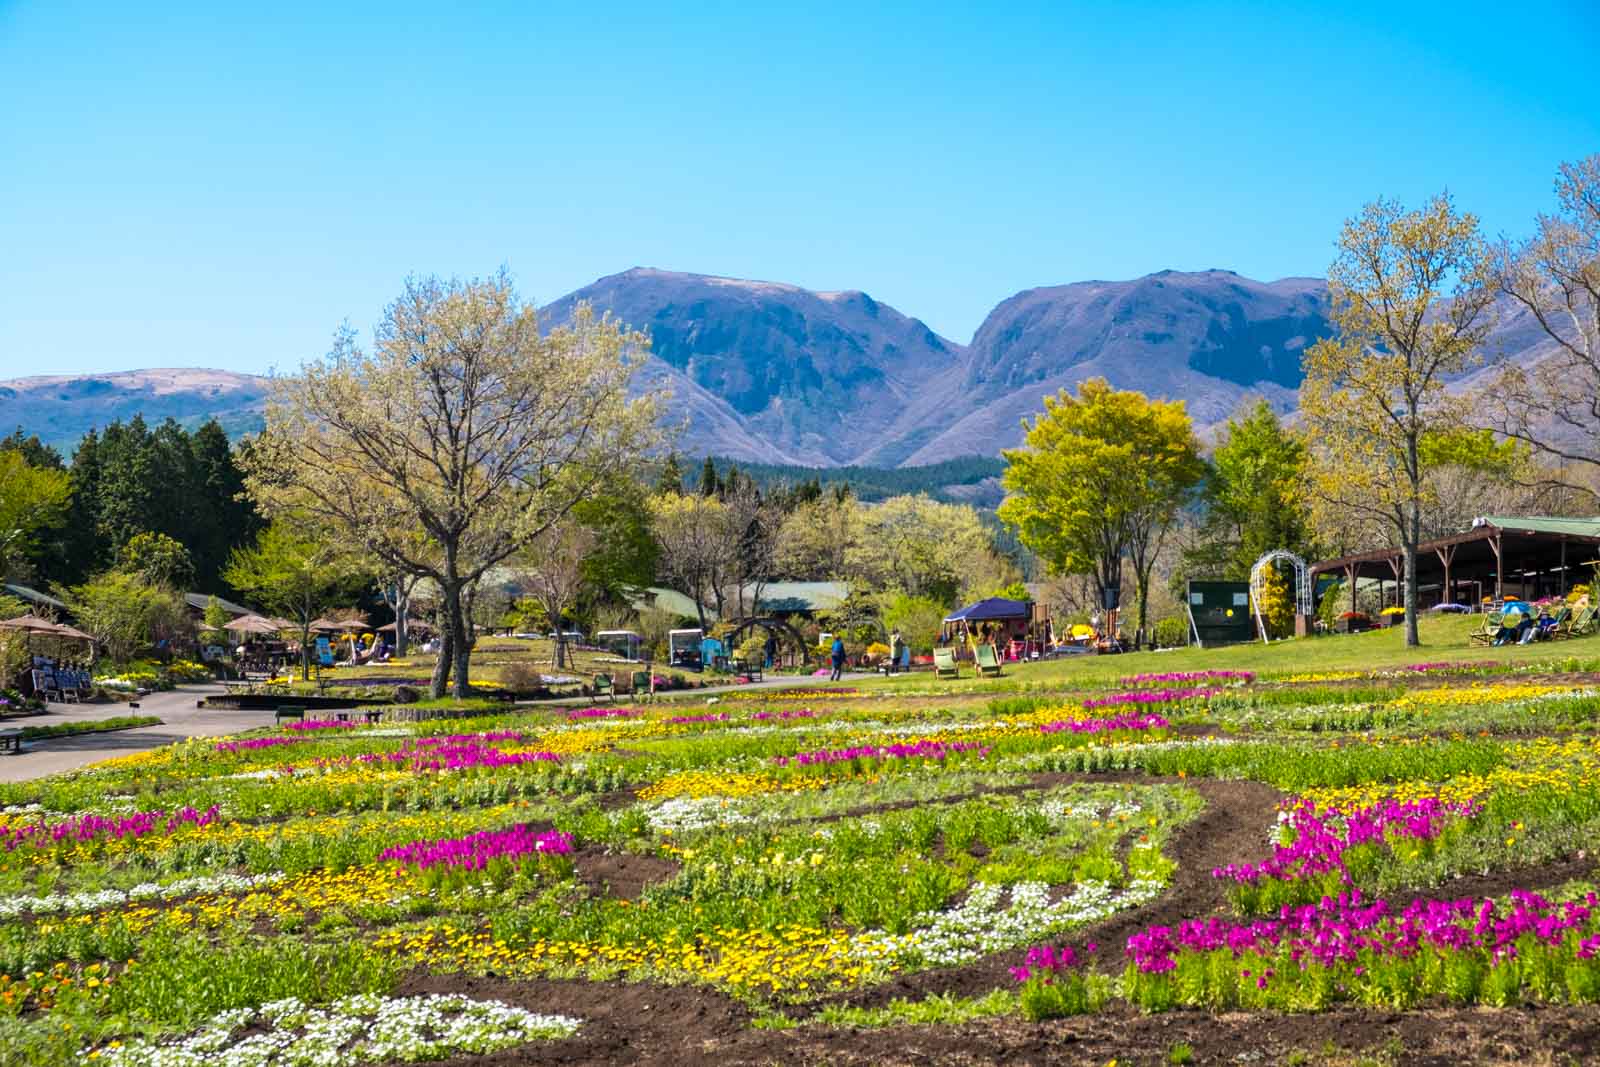 Kuju Flower Park: When is the Best Time to Visit and What Are the Seasonal Flowers?